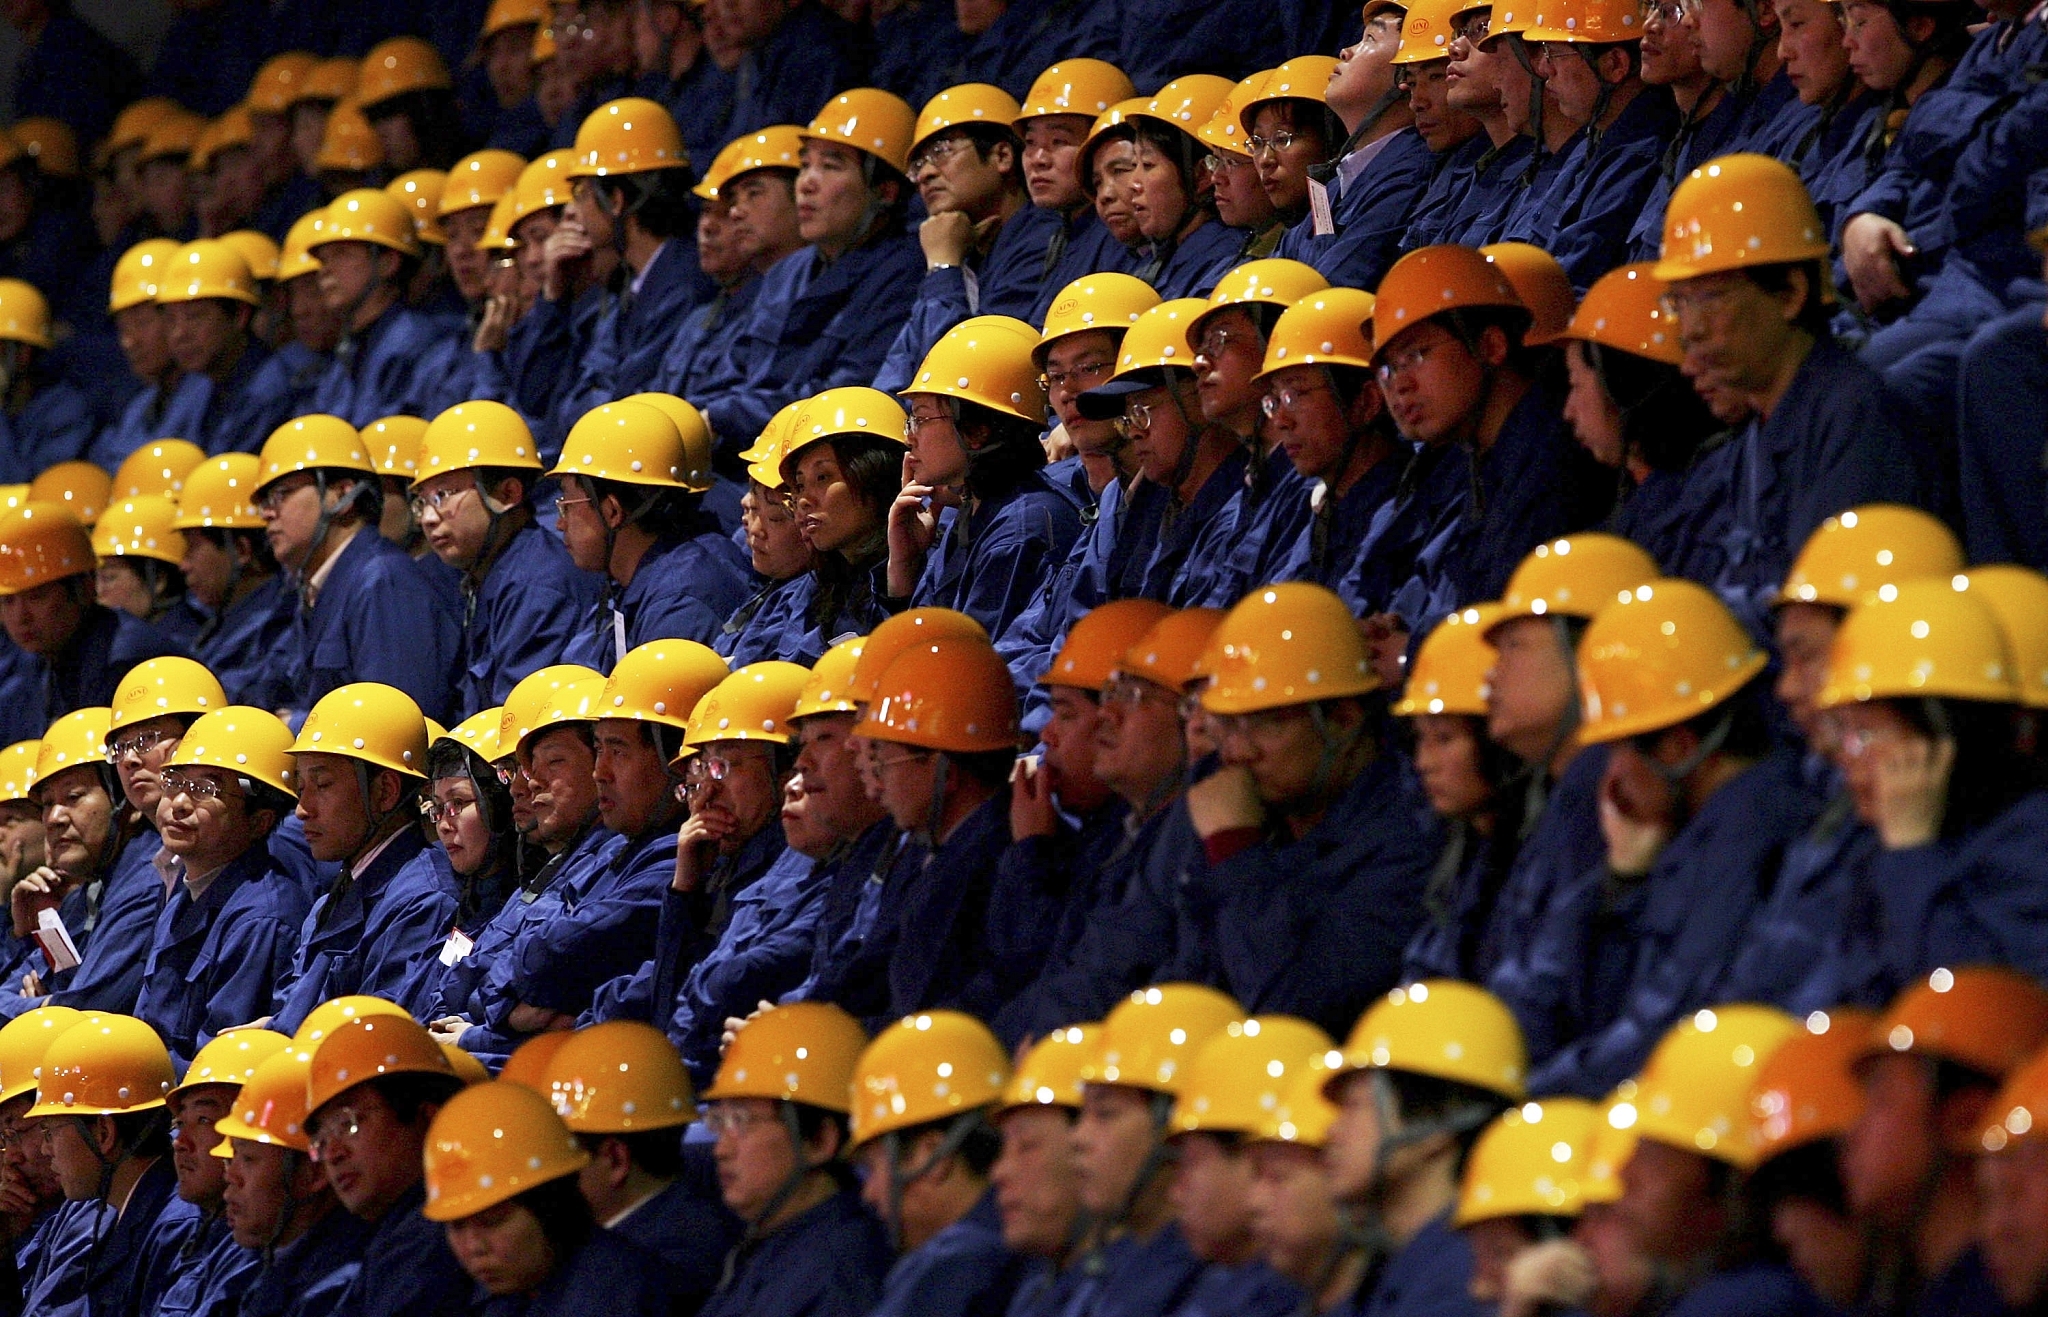 Workers at a factory in China. (Guang Niu via Getty Images)